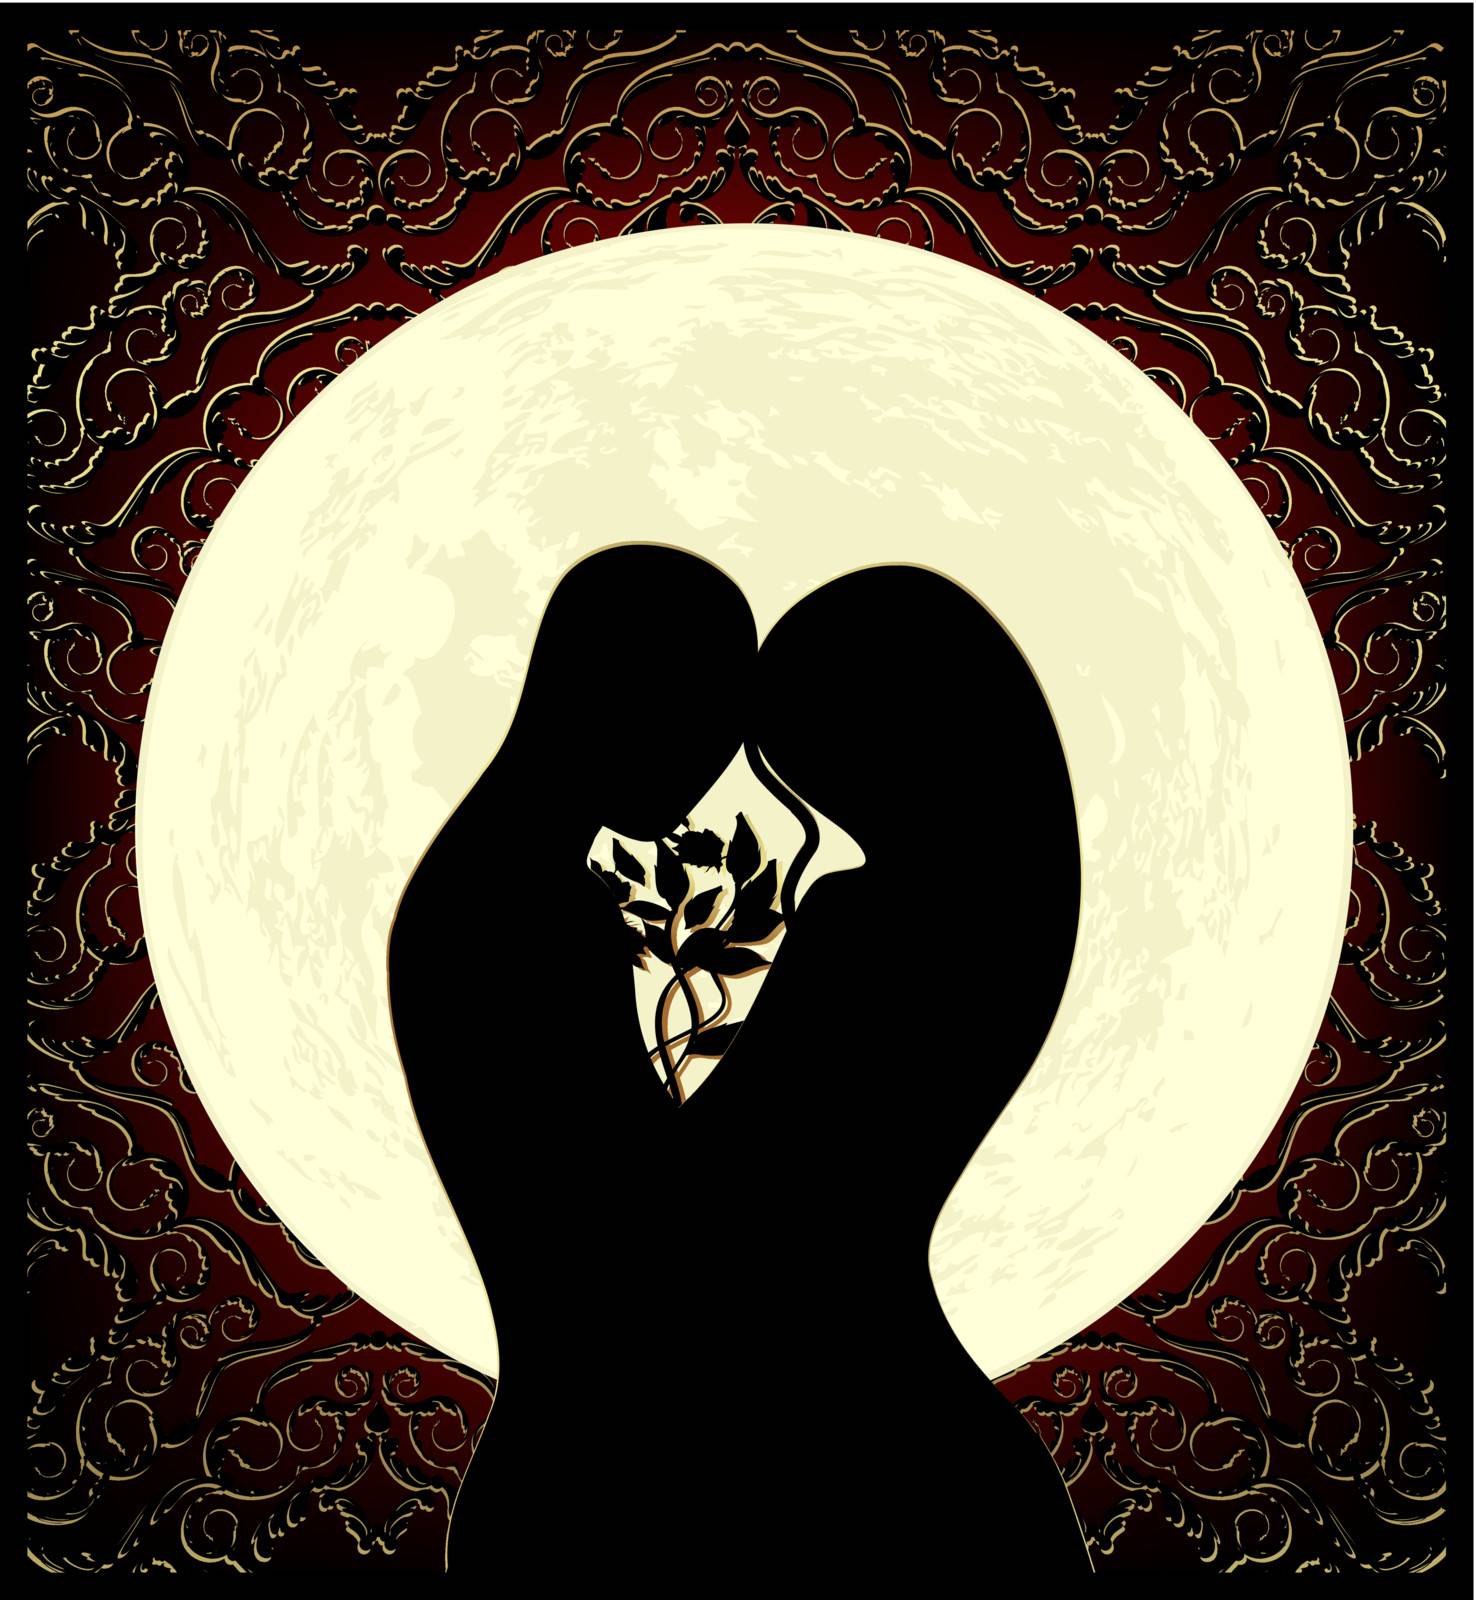 Silhouettes of lovers, a big full moon and ornament